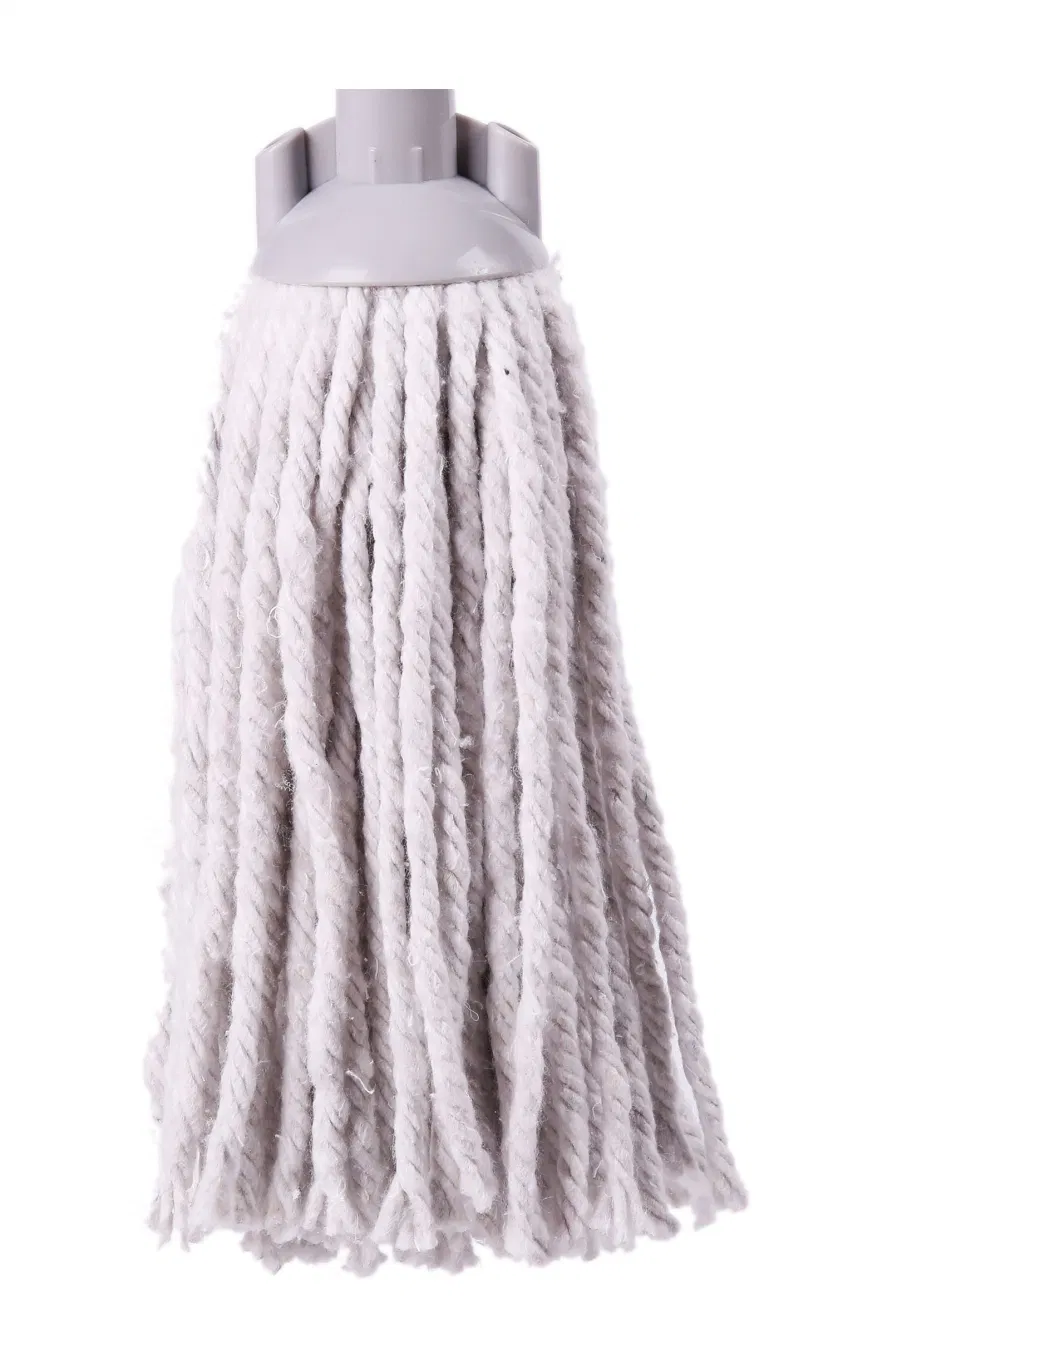 Chinese Supplier Professional Cleaning Cotton Mop Head